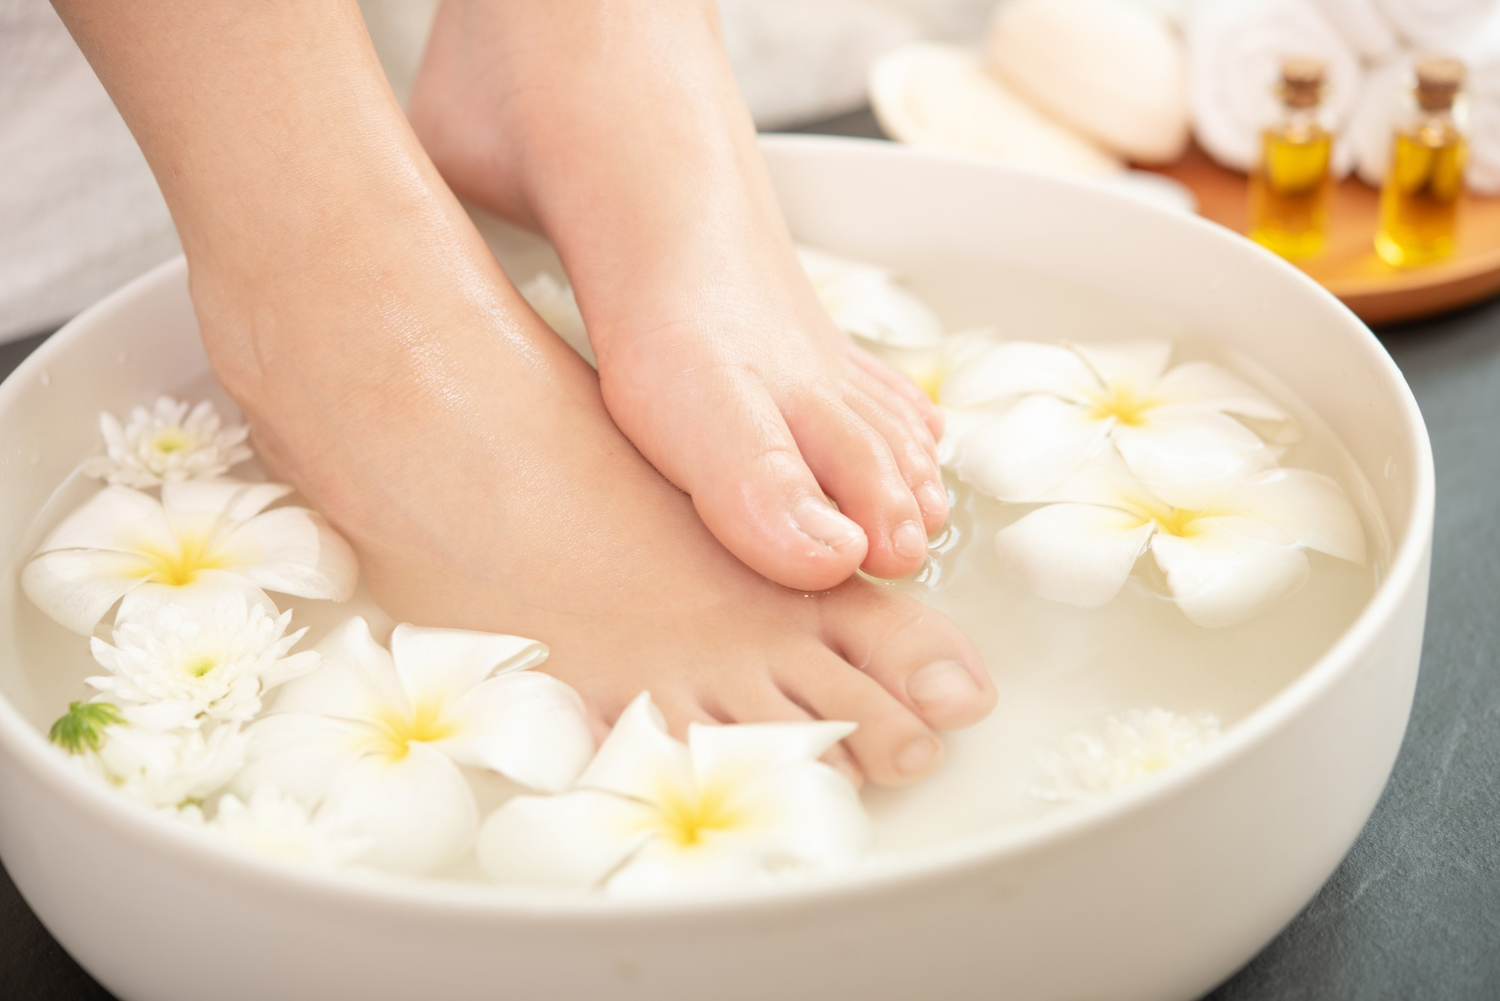 5 BEST TYPES OF PEDICURE FOR HEALTHY FEET